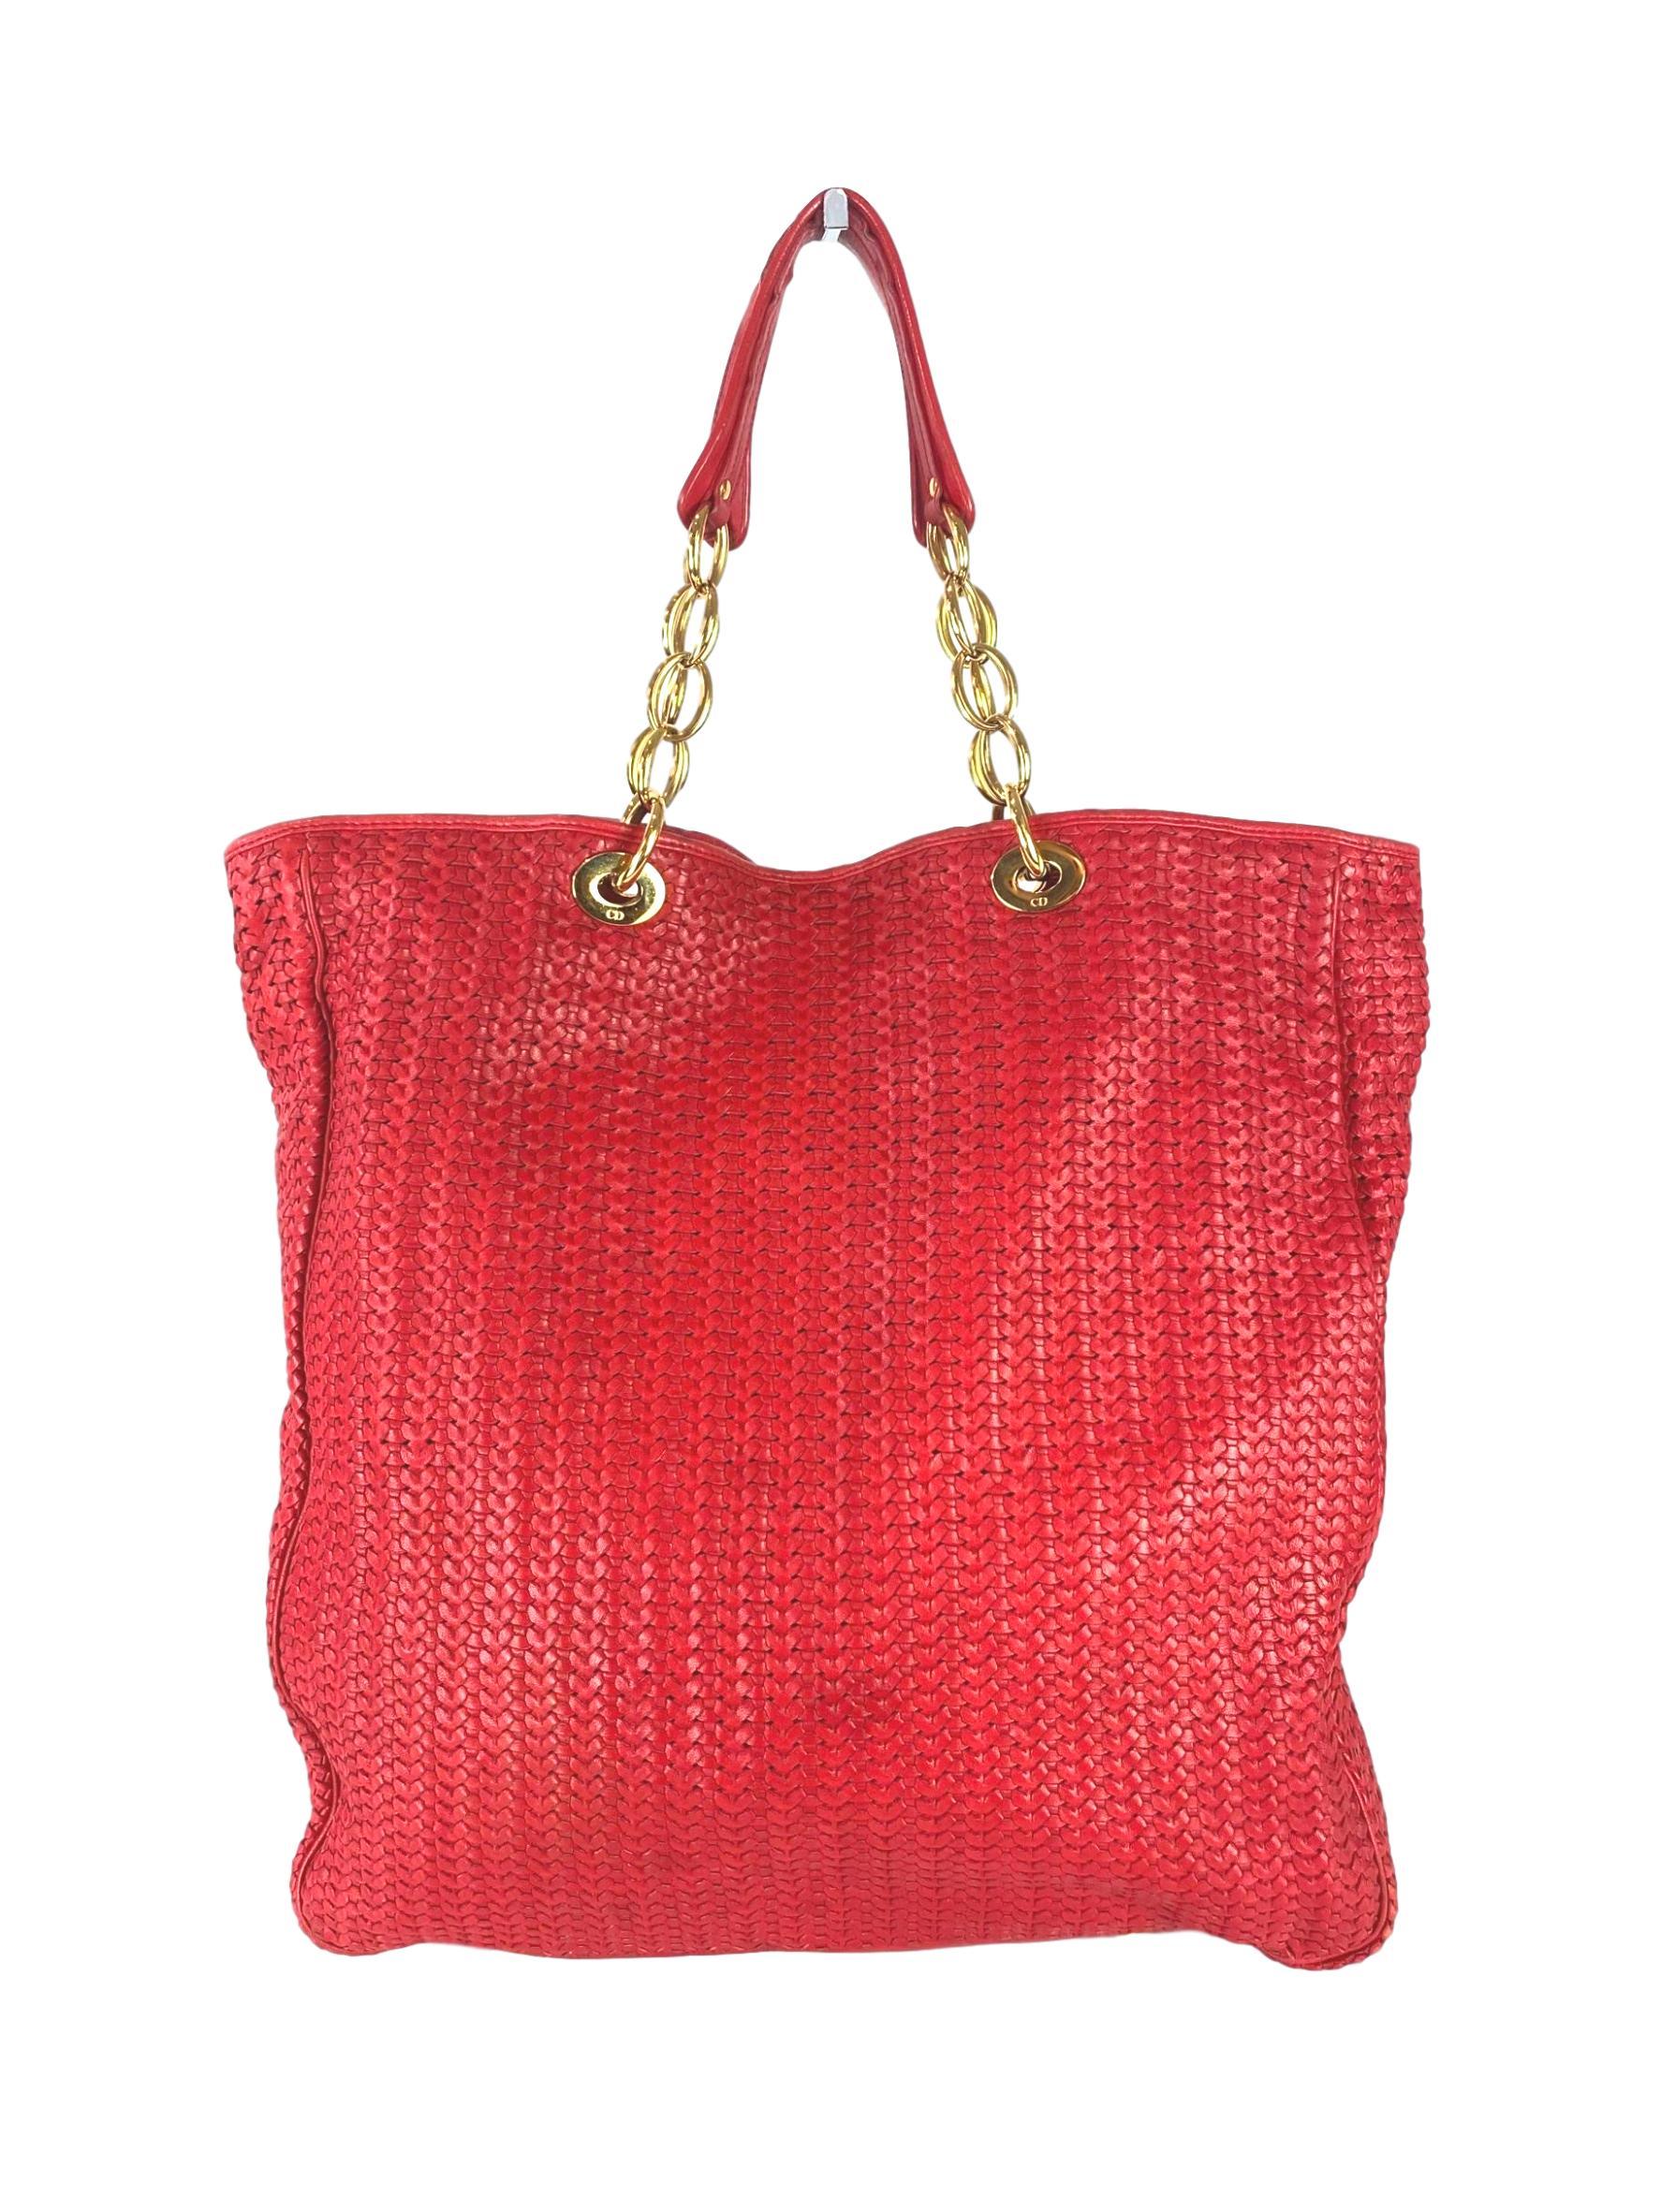 red woven leather bag